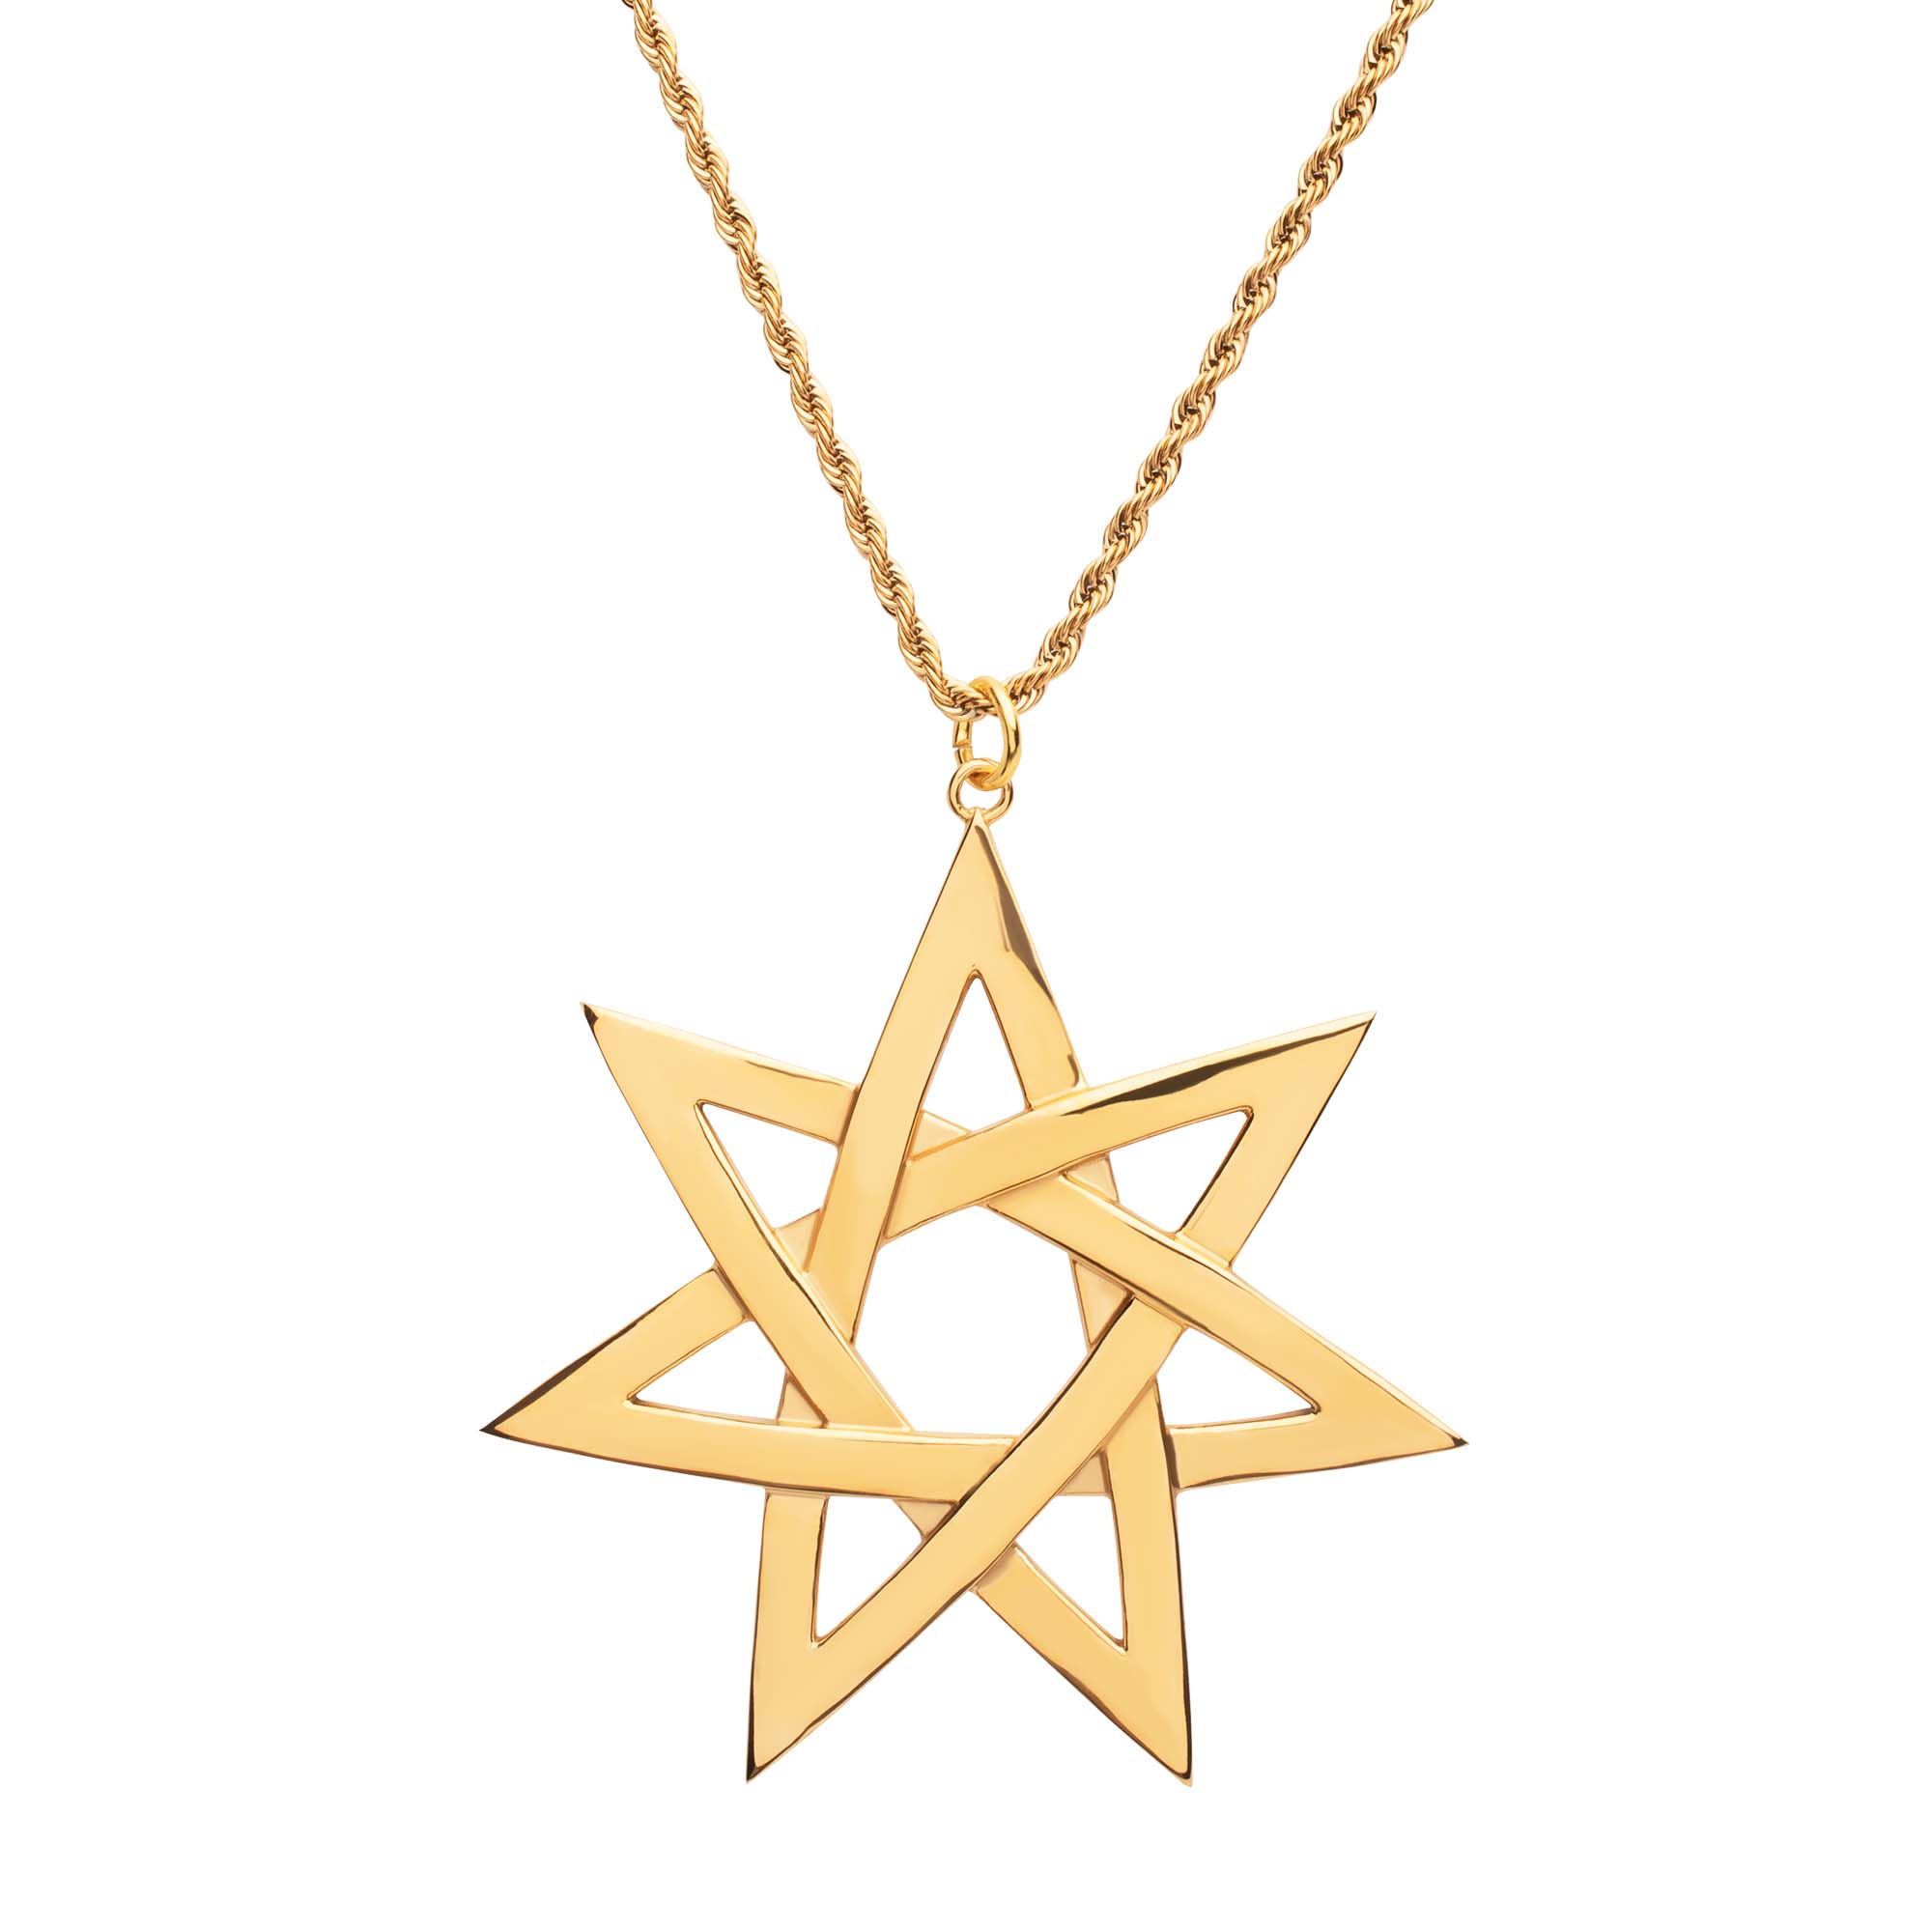 Game of Thrones: House of the Dragon Alicent 7 Pointed Star Pendant Necklace